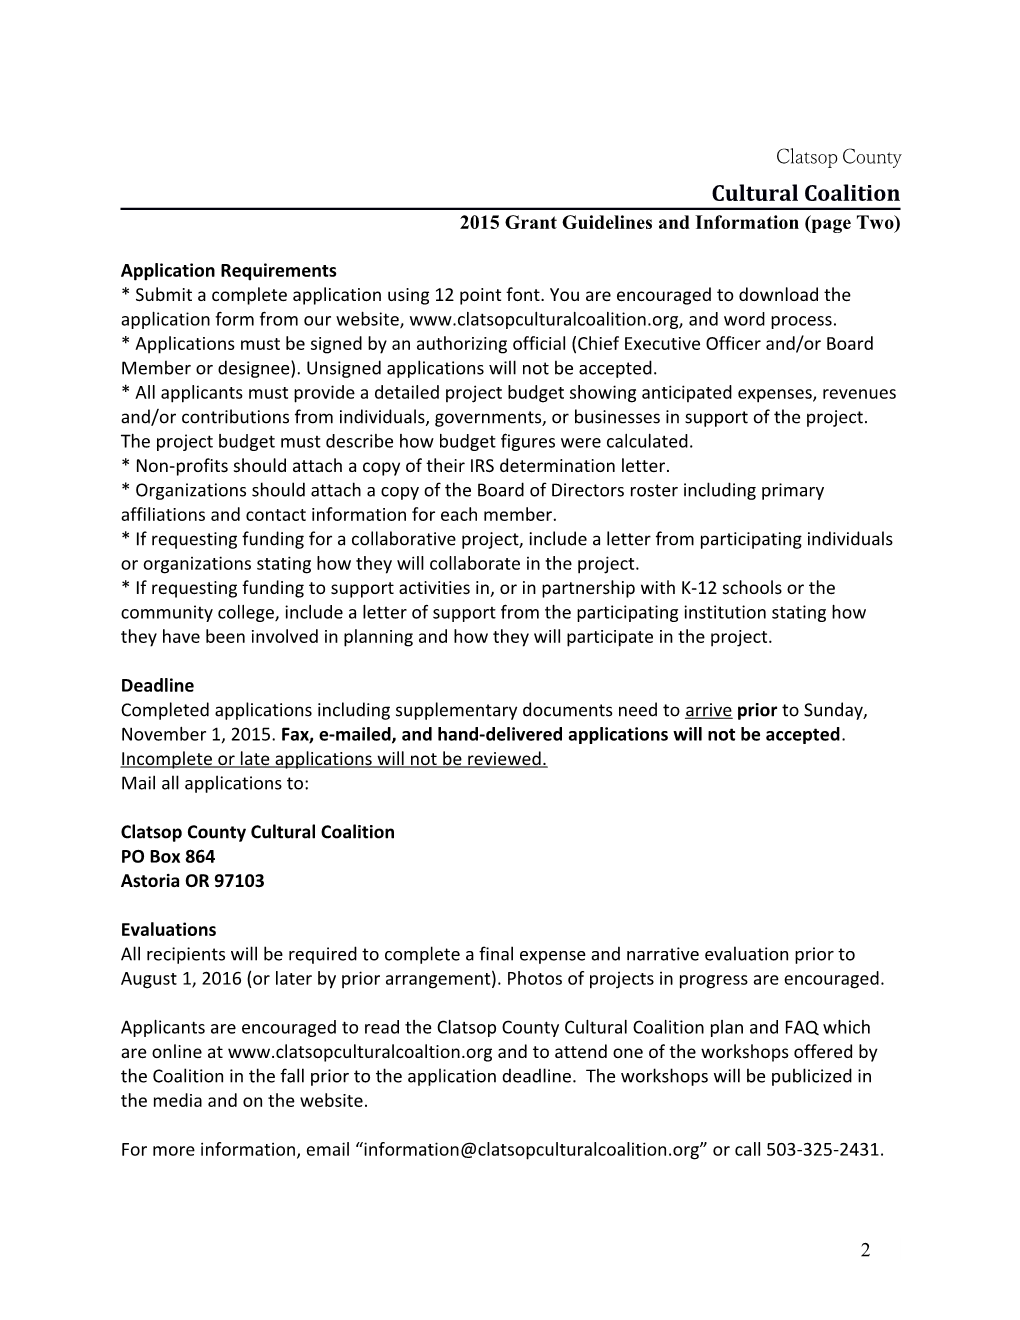 2015 Grant Guidelines and Information (Page One)